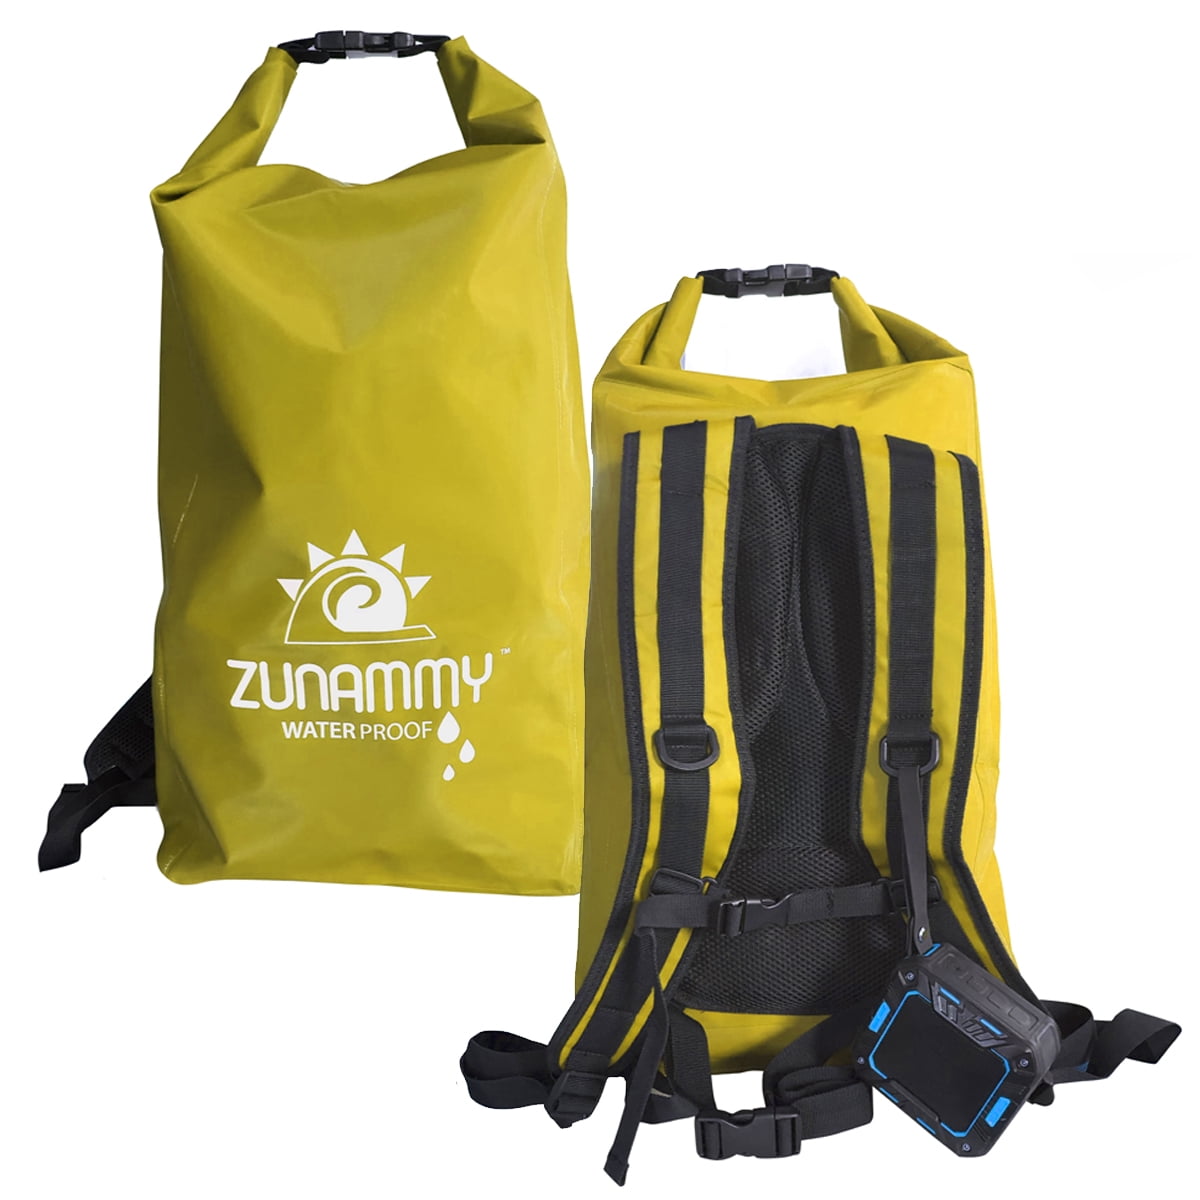 Zunammy Waterproof Bag In Yellow Holds 1.5 Liters Of Anything NWT 